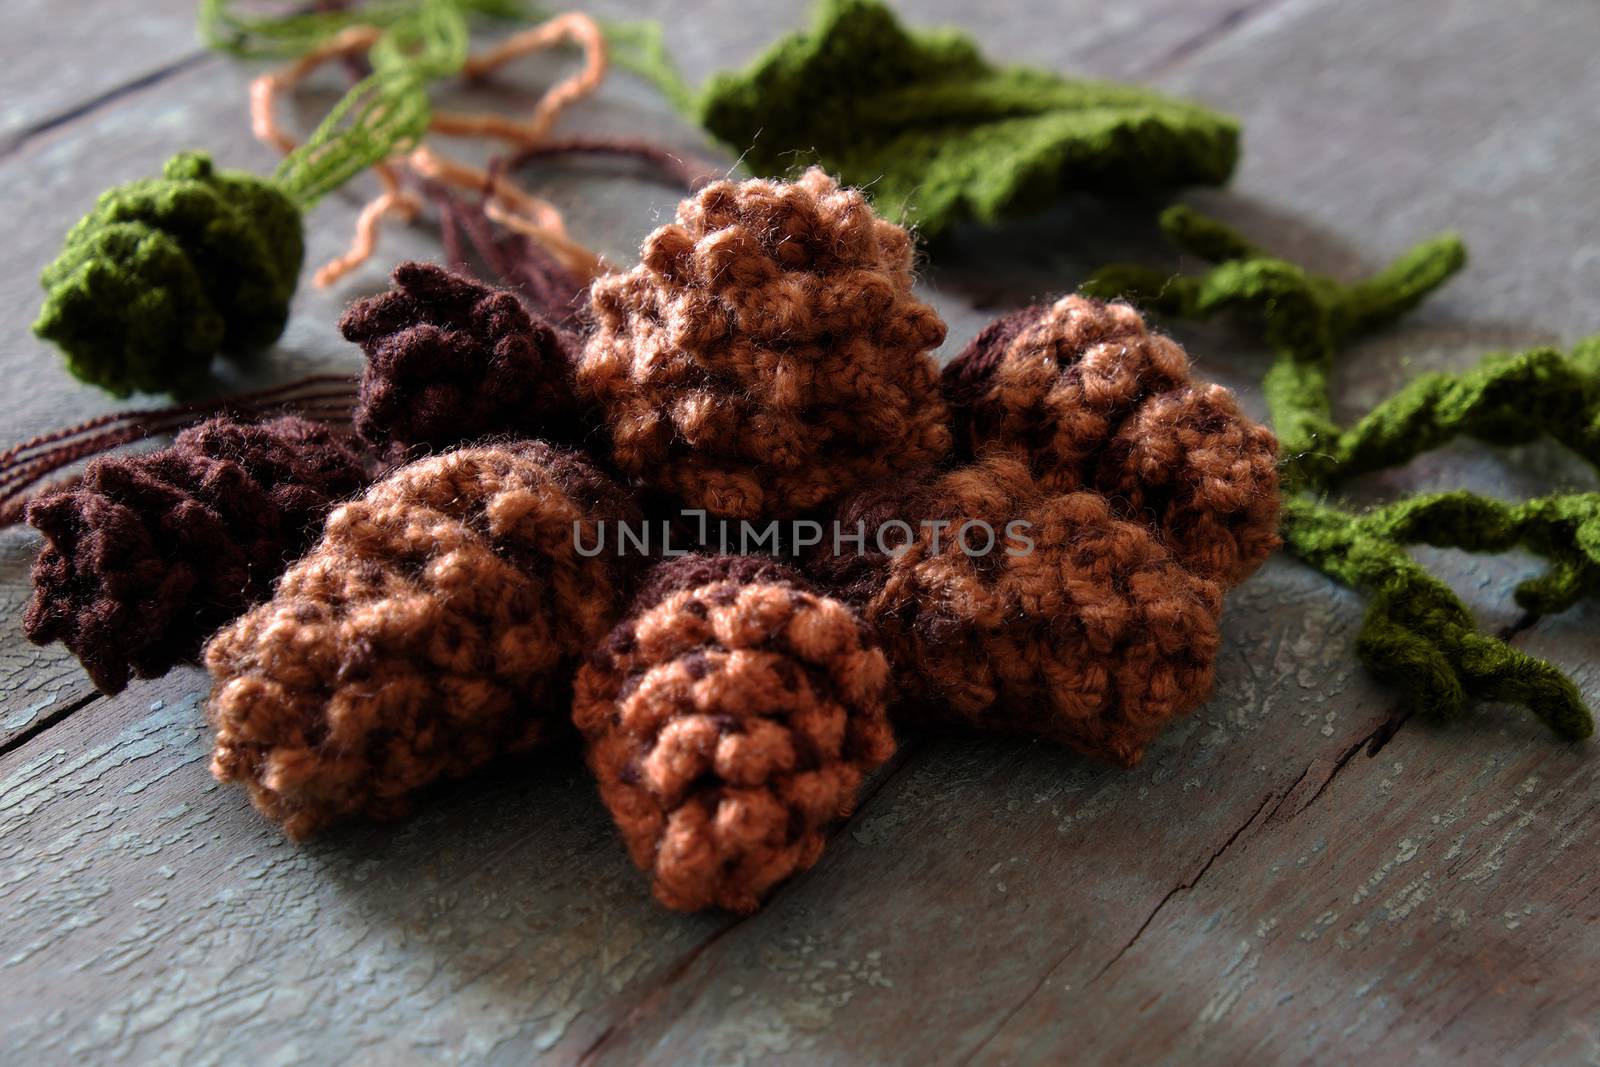 Group of knitted pinecone from brown yarn to decor for Xmas holiday, pine cone is popular Christmas ornament in wintertime